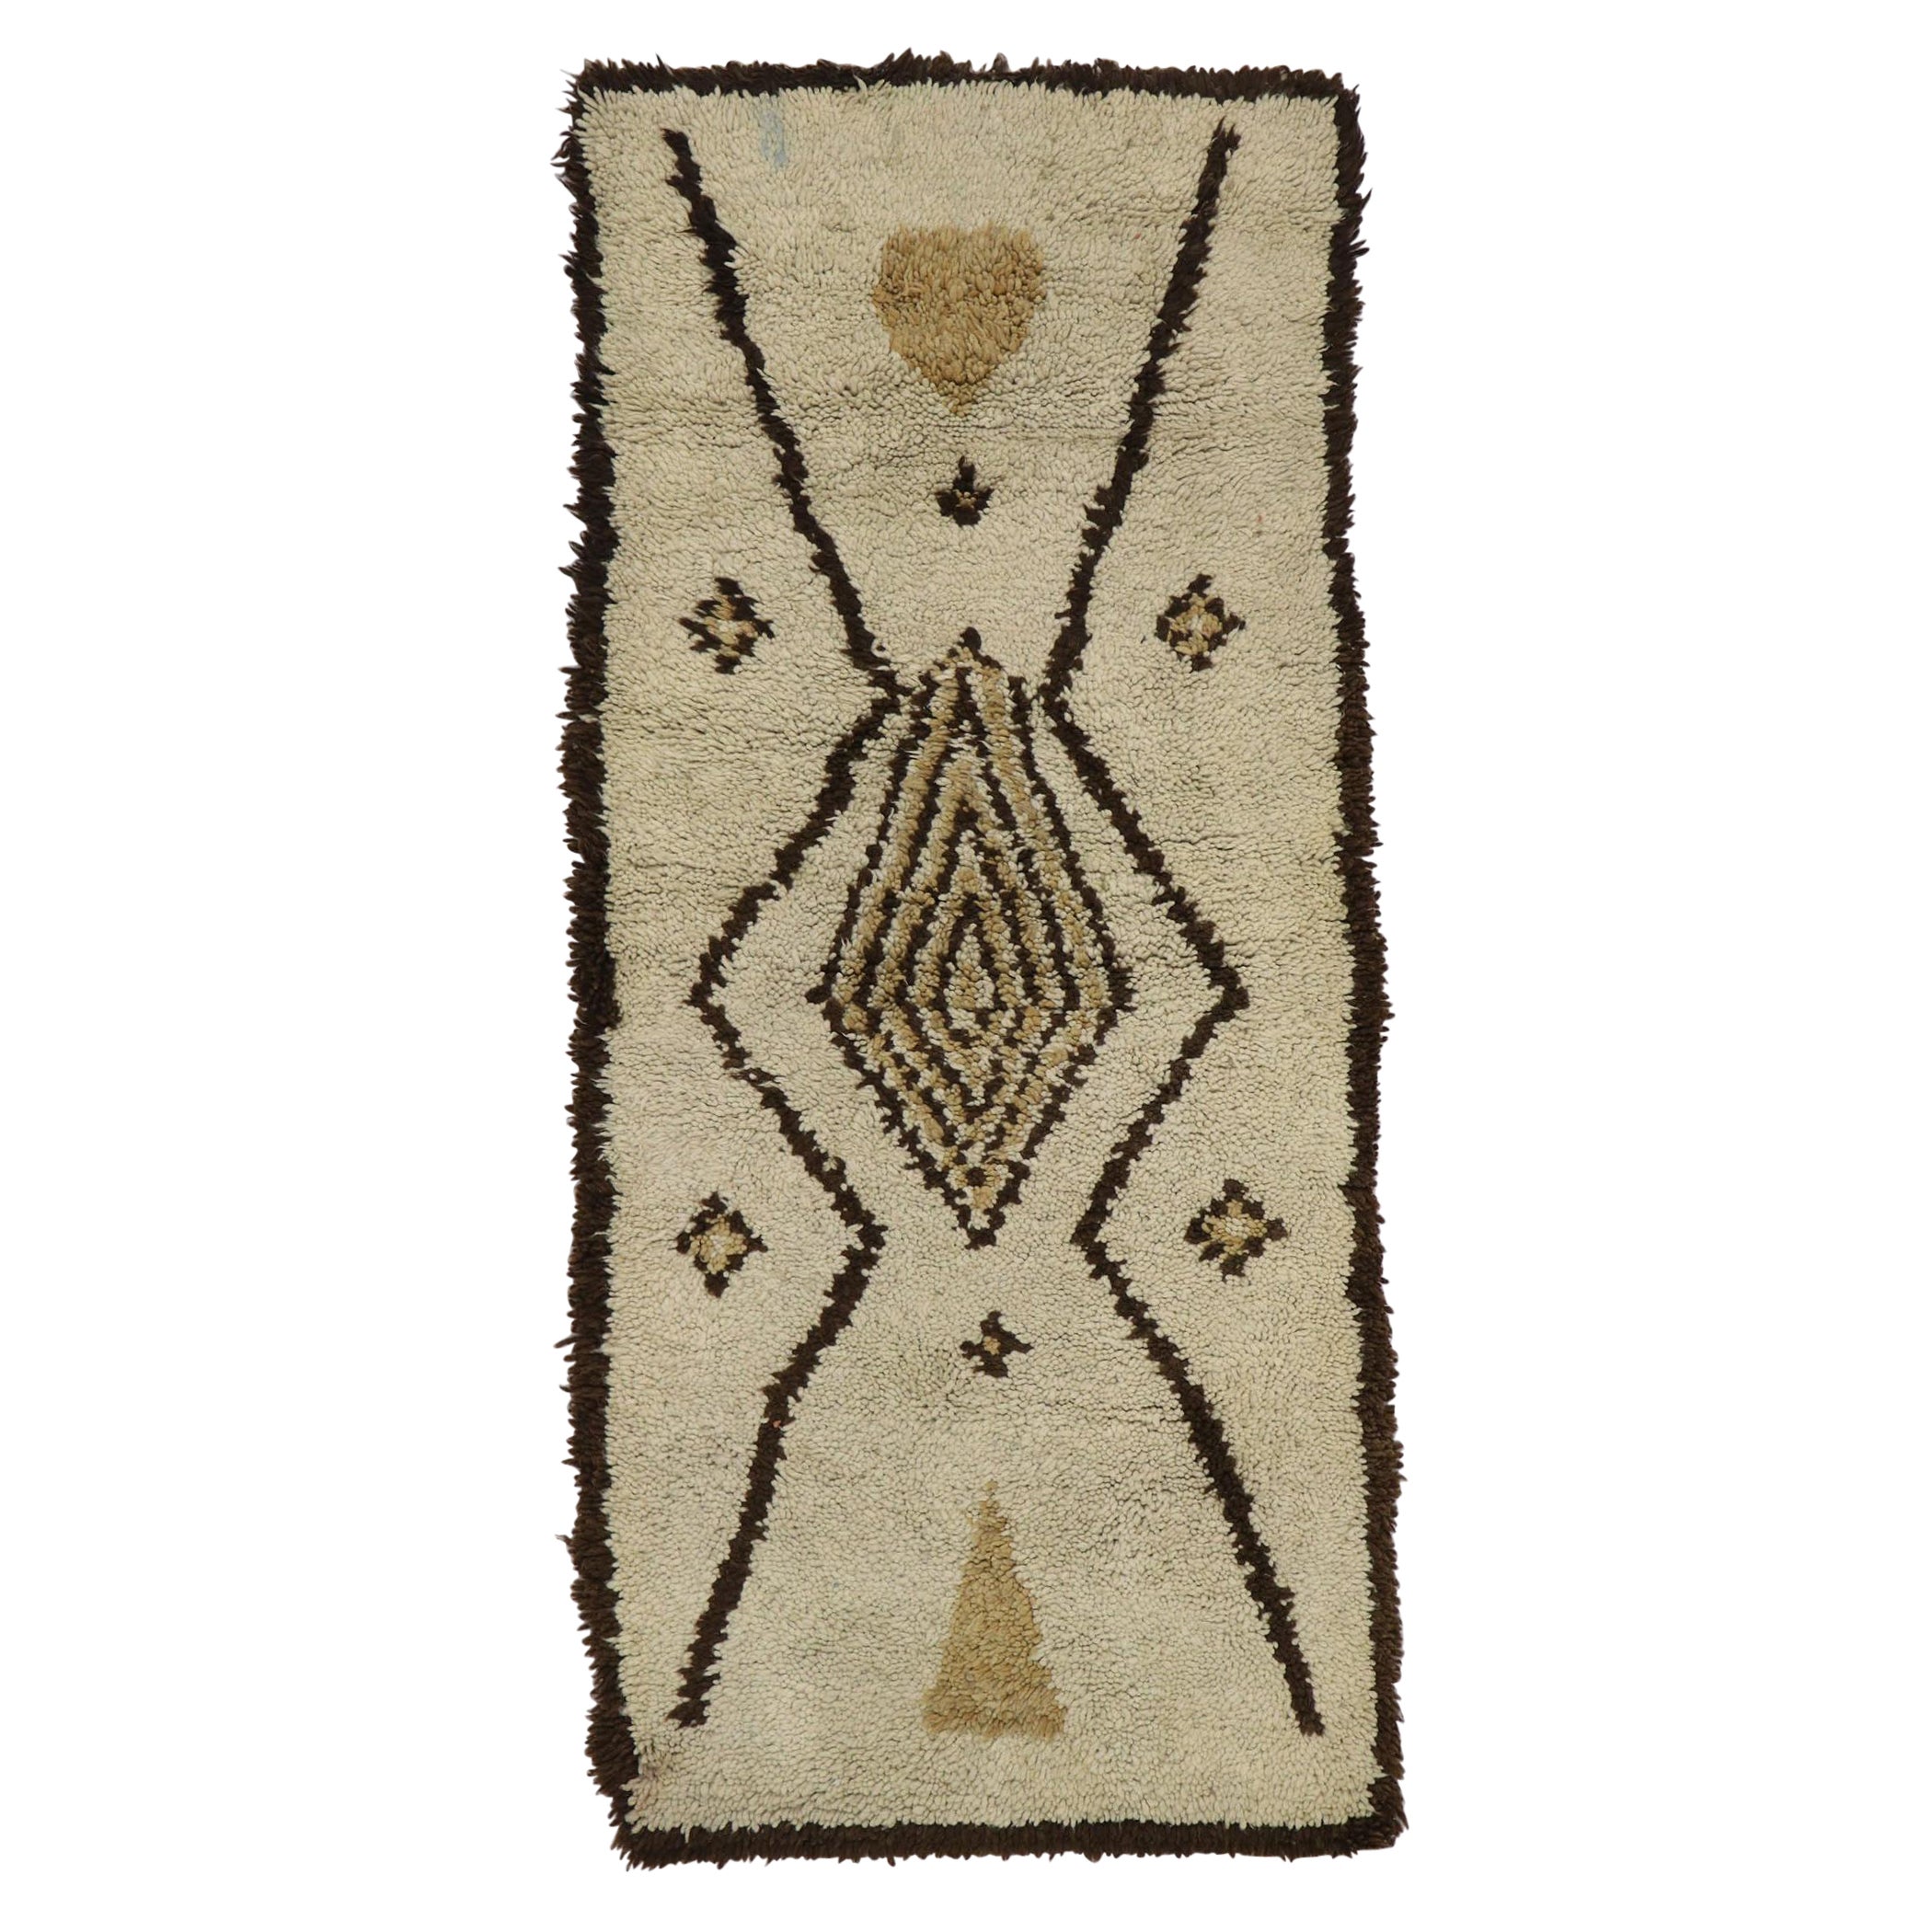 Vintage Berber Moroccan Rug with Mid-Century Modern Style